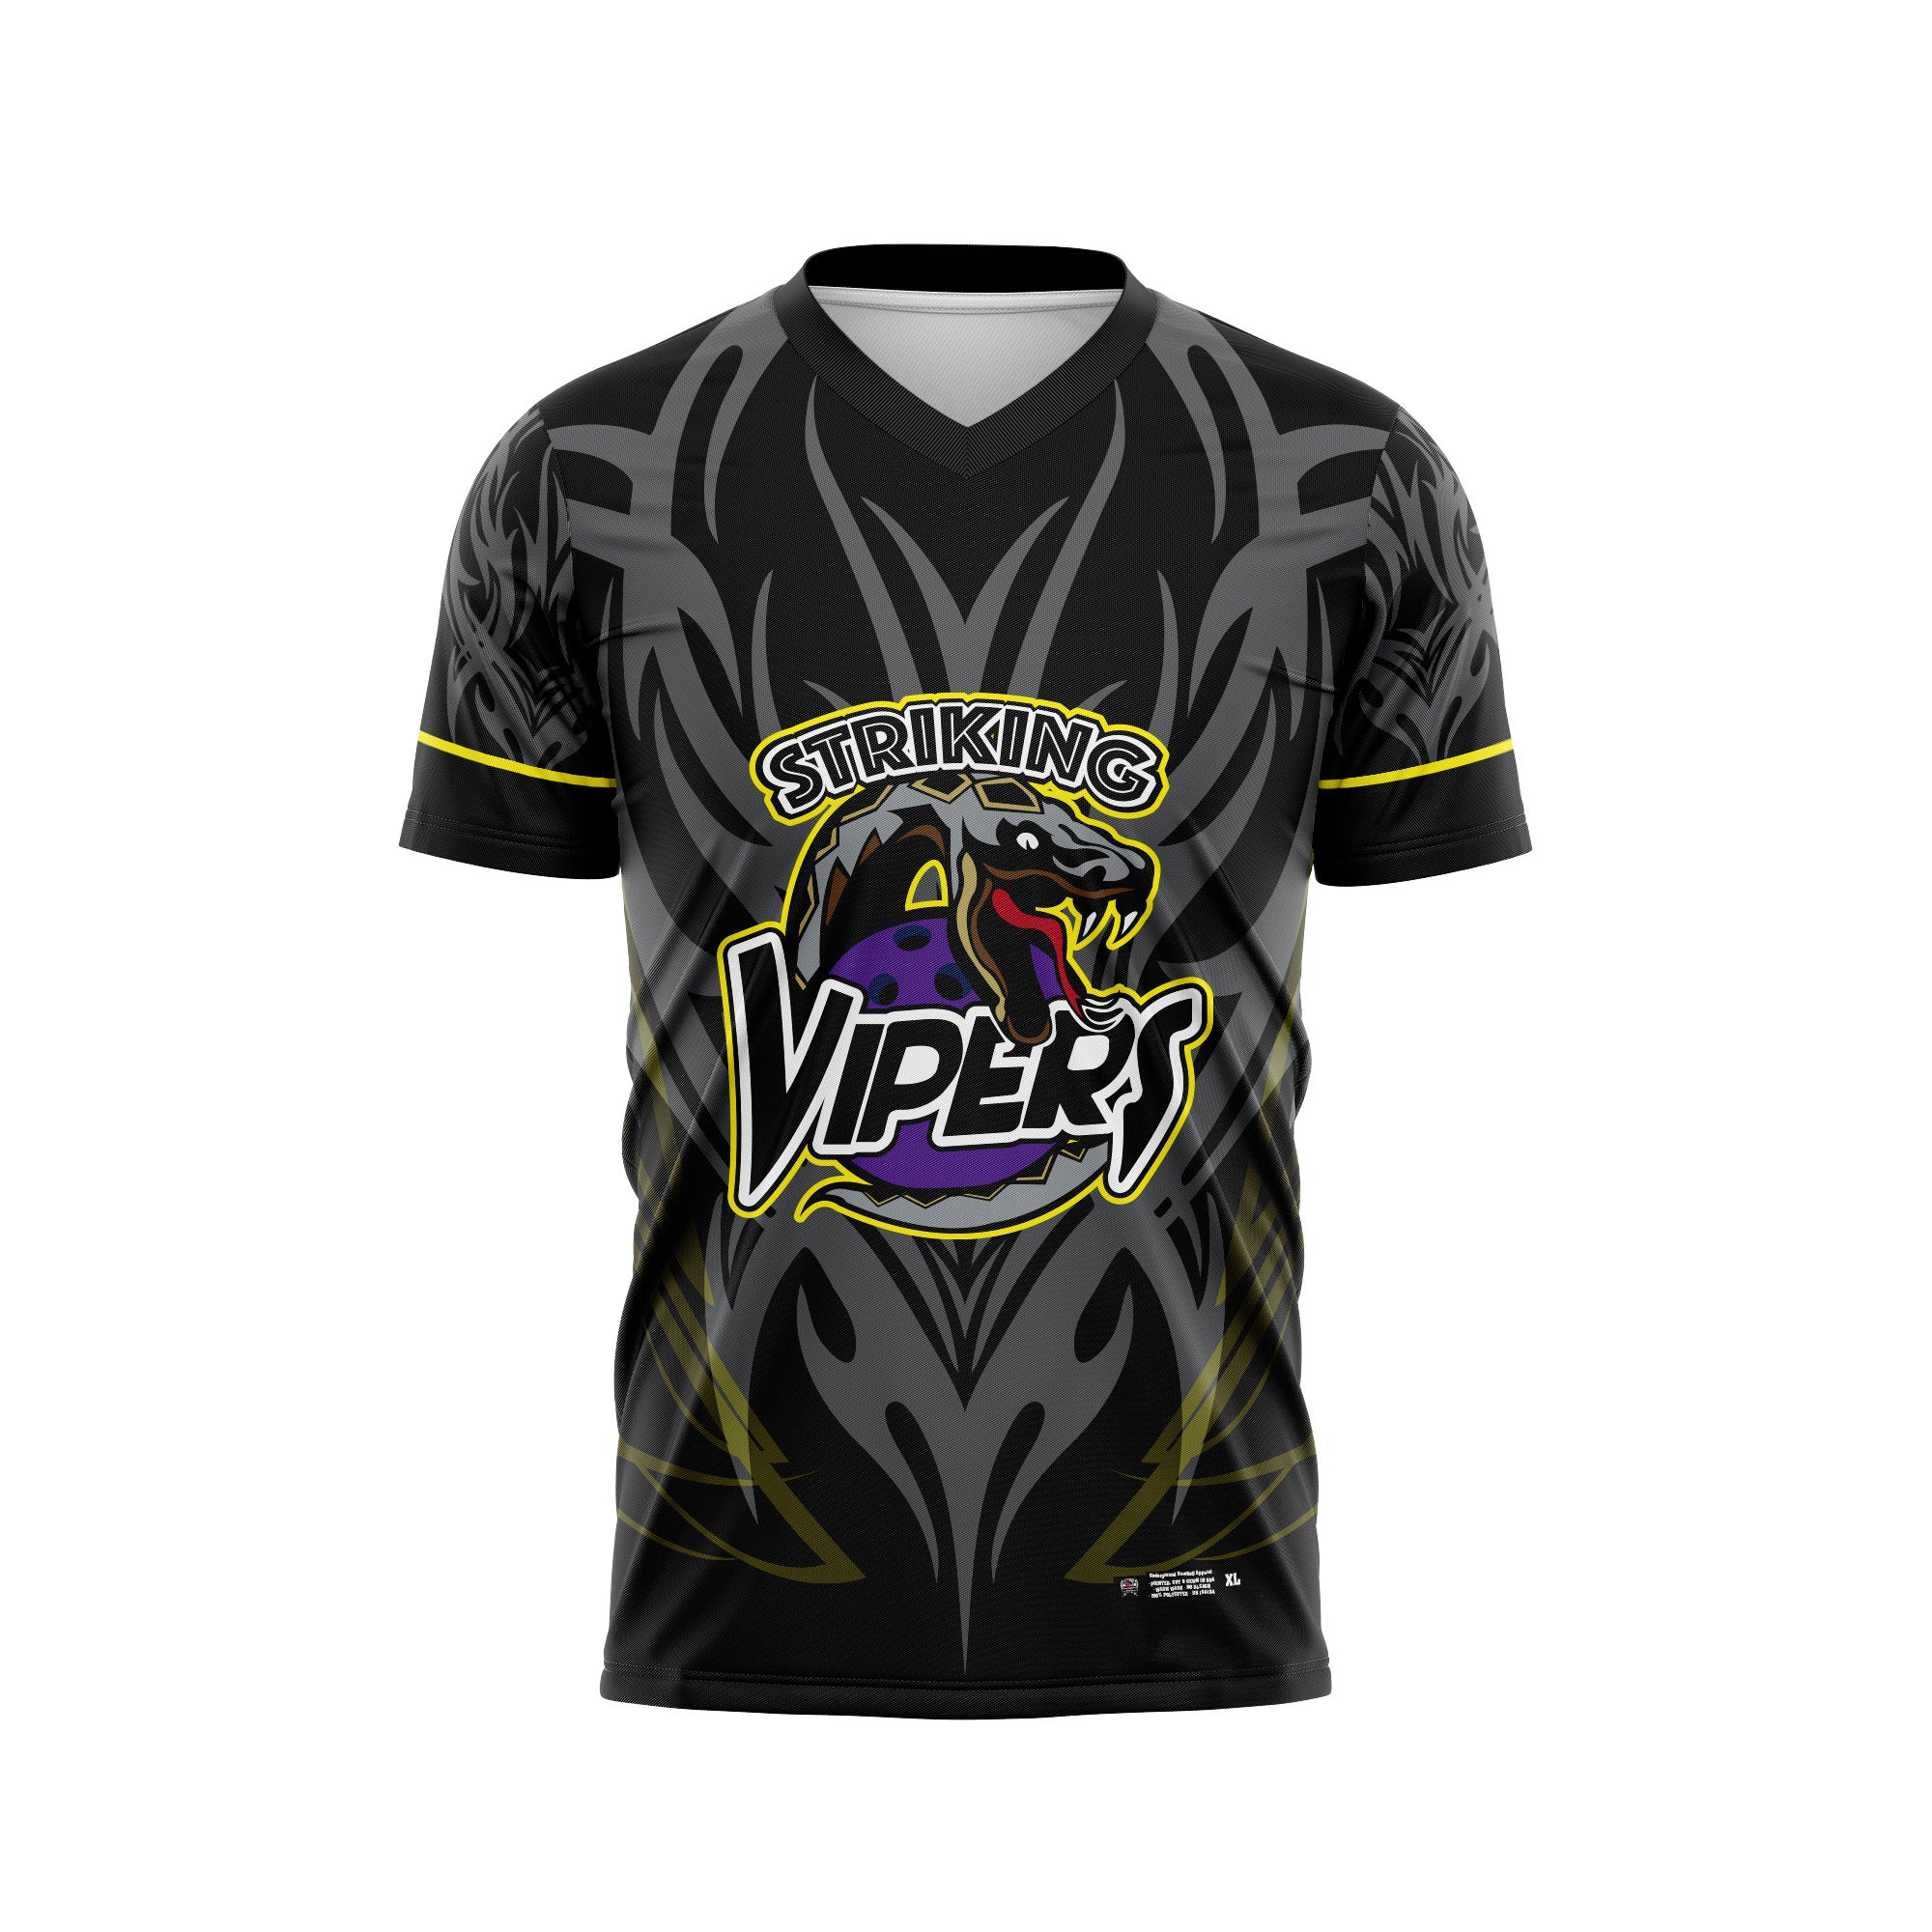 Striking Vipers Home / Main Jersey